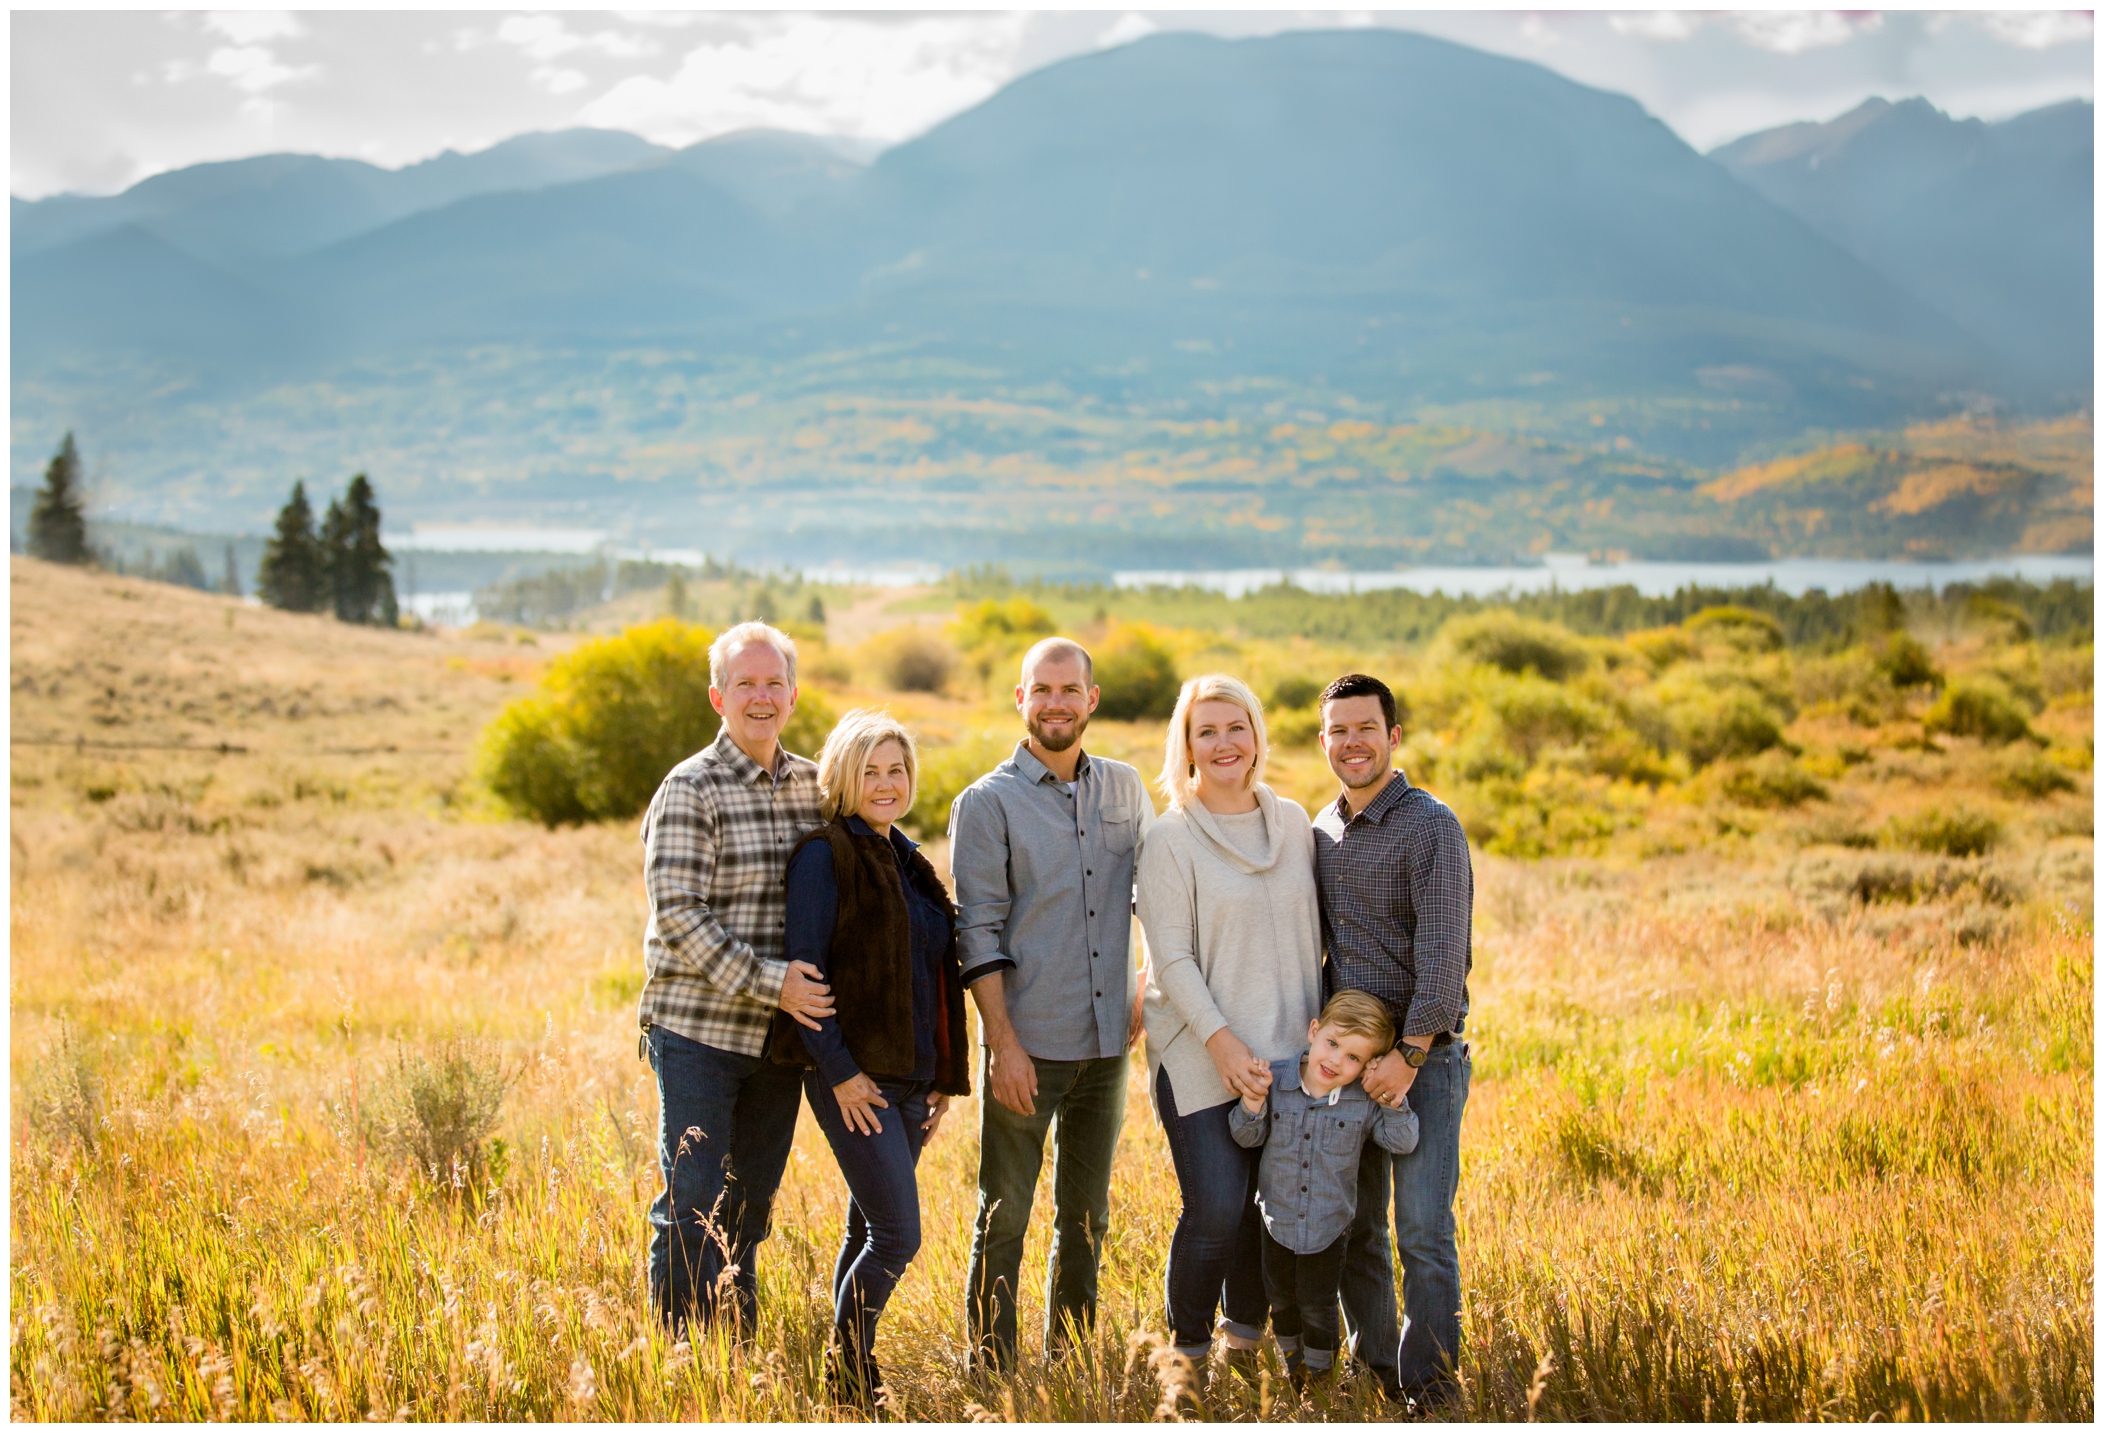 Breckenridge family portraits at Sapphire Point Overlook by Colorado mountain photographer Plum Pretty Photography